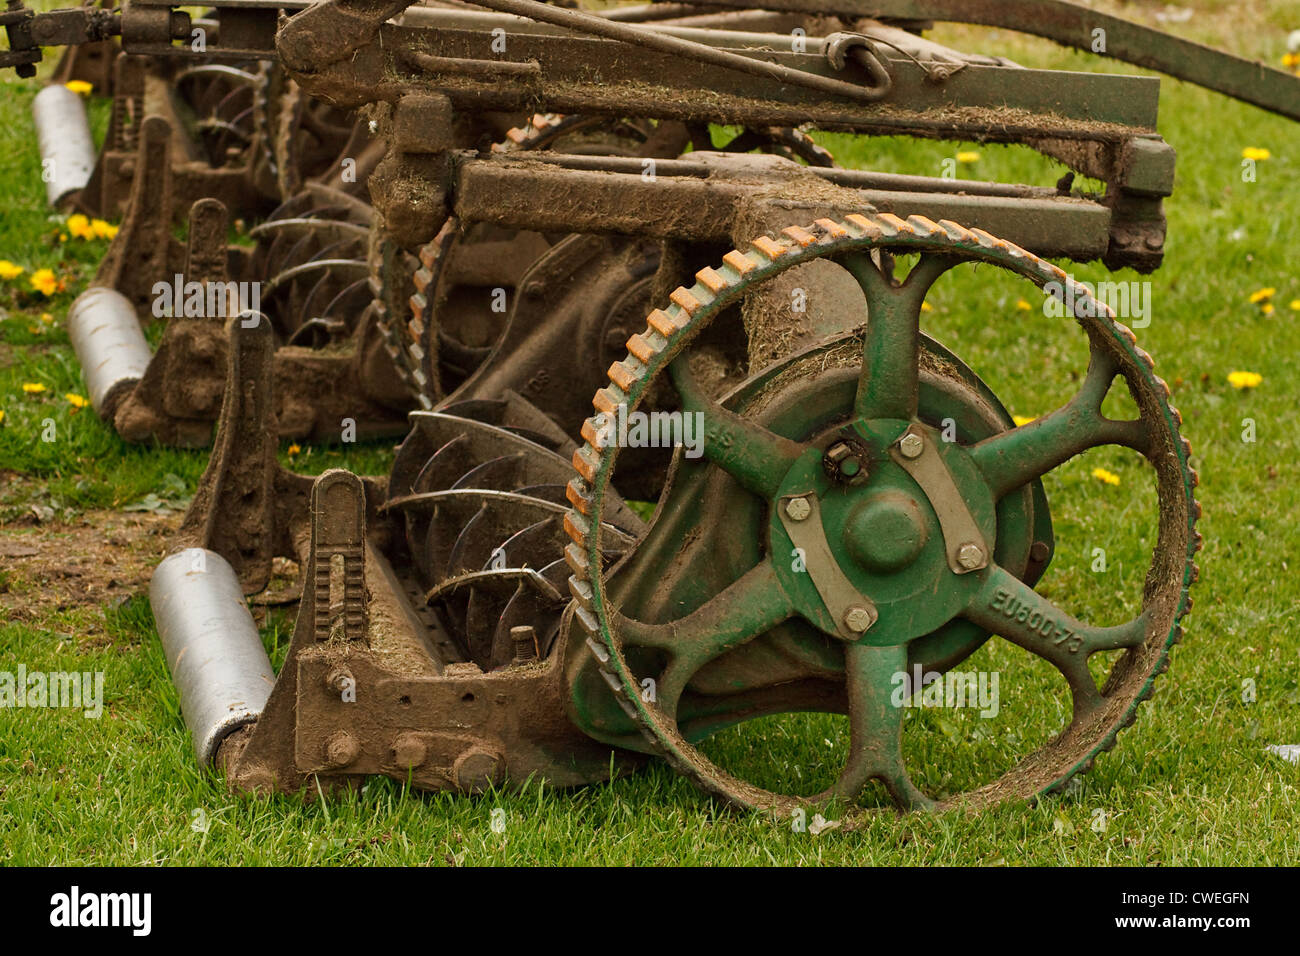 Horticultural industrial tractors lawnmower for football pitches and large grass grounds Stock Photo